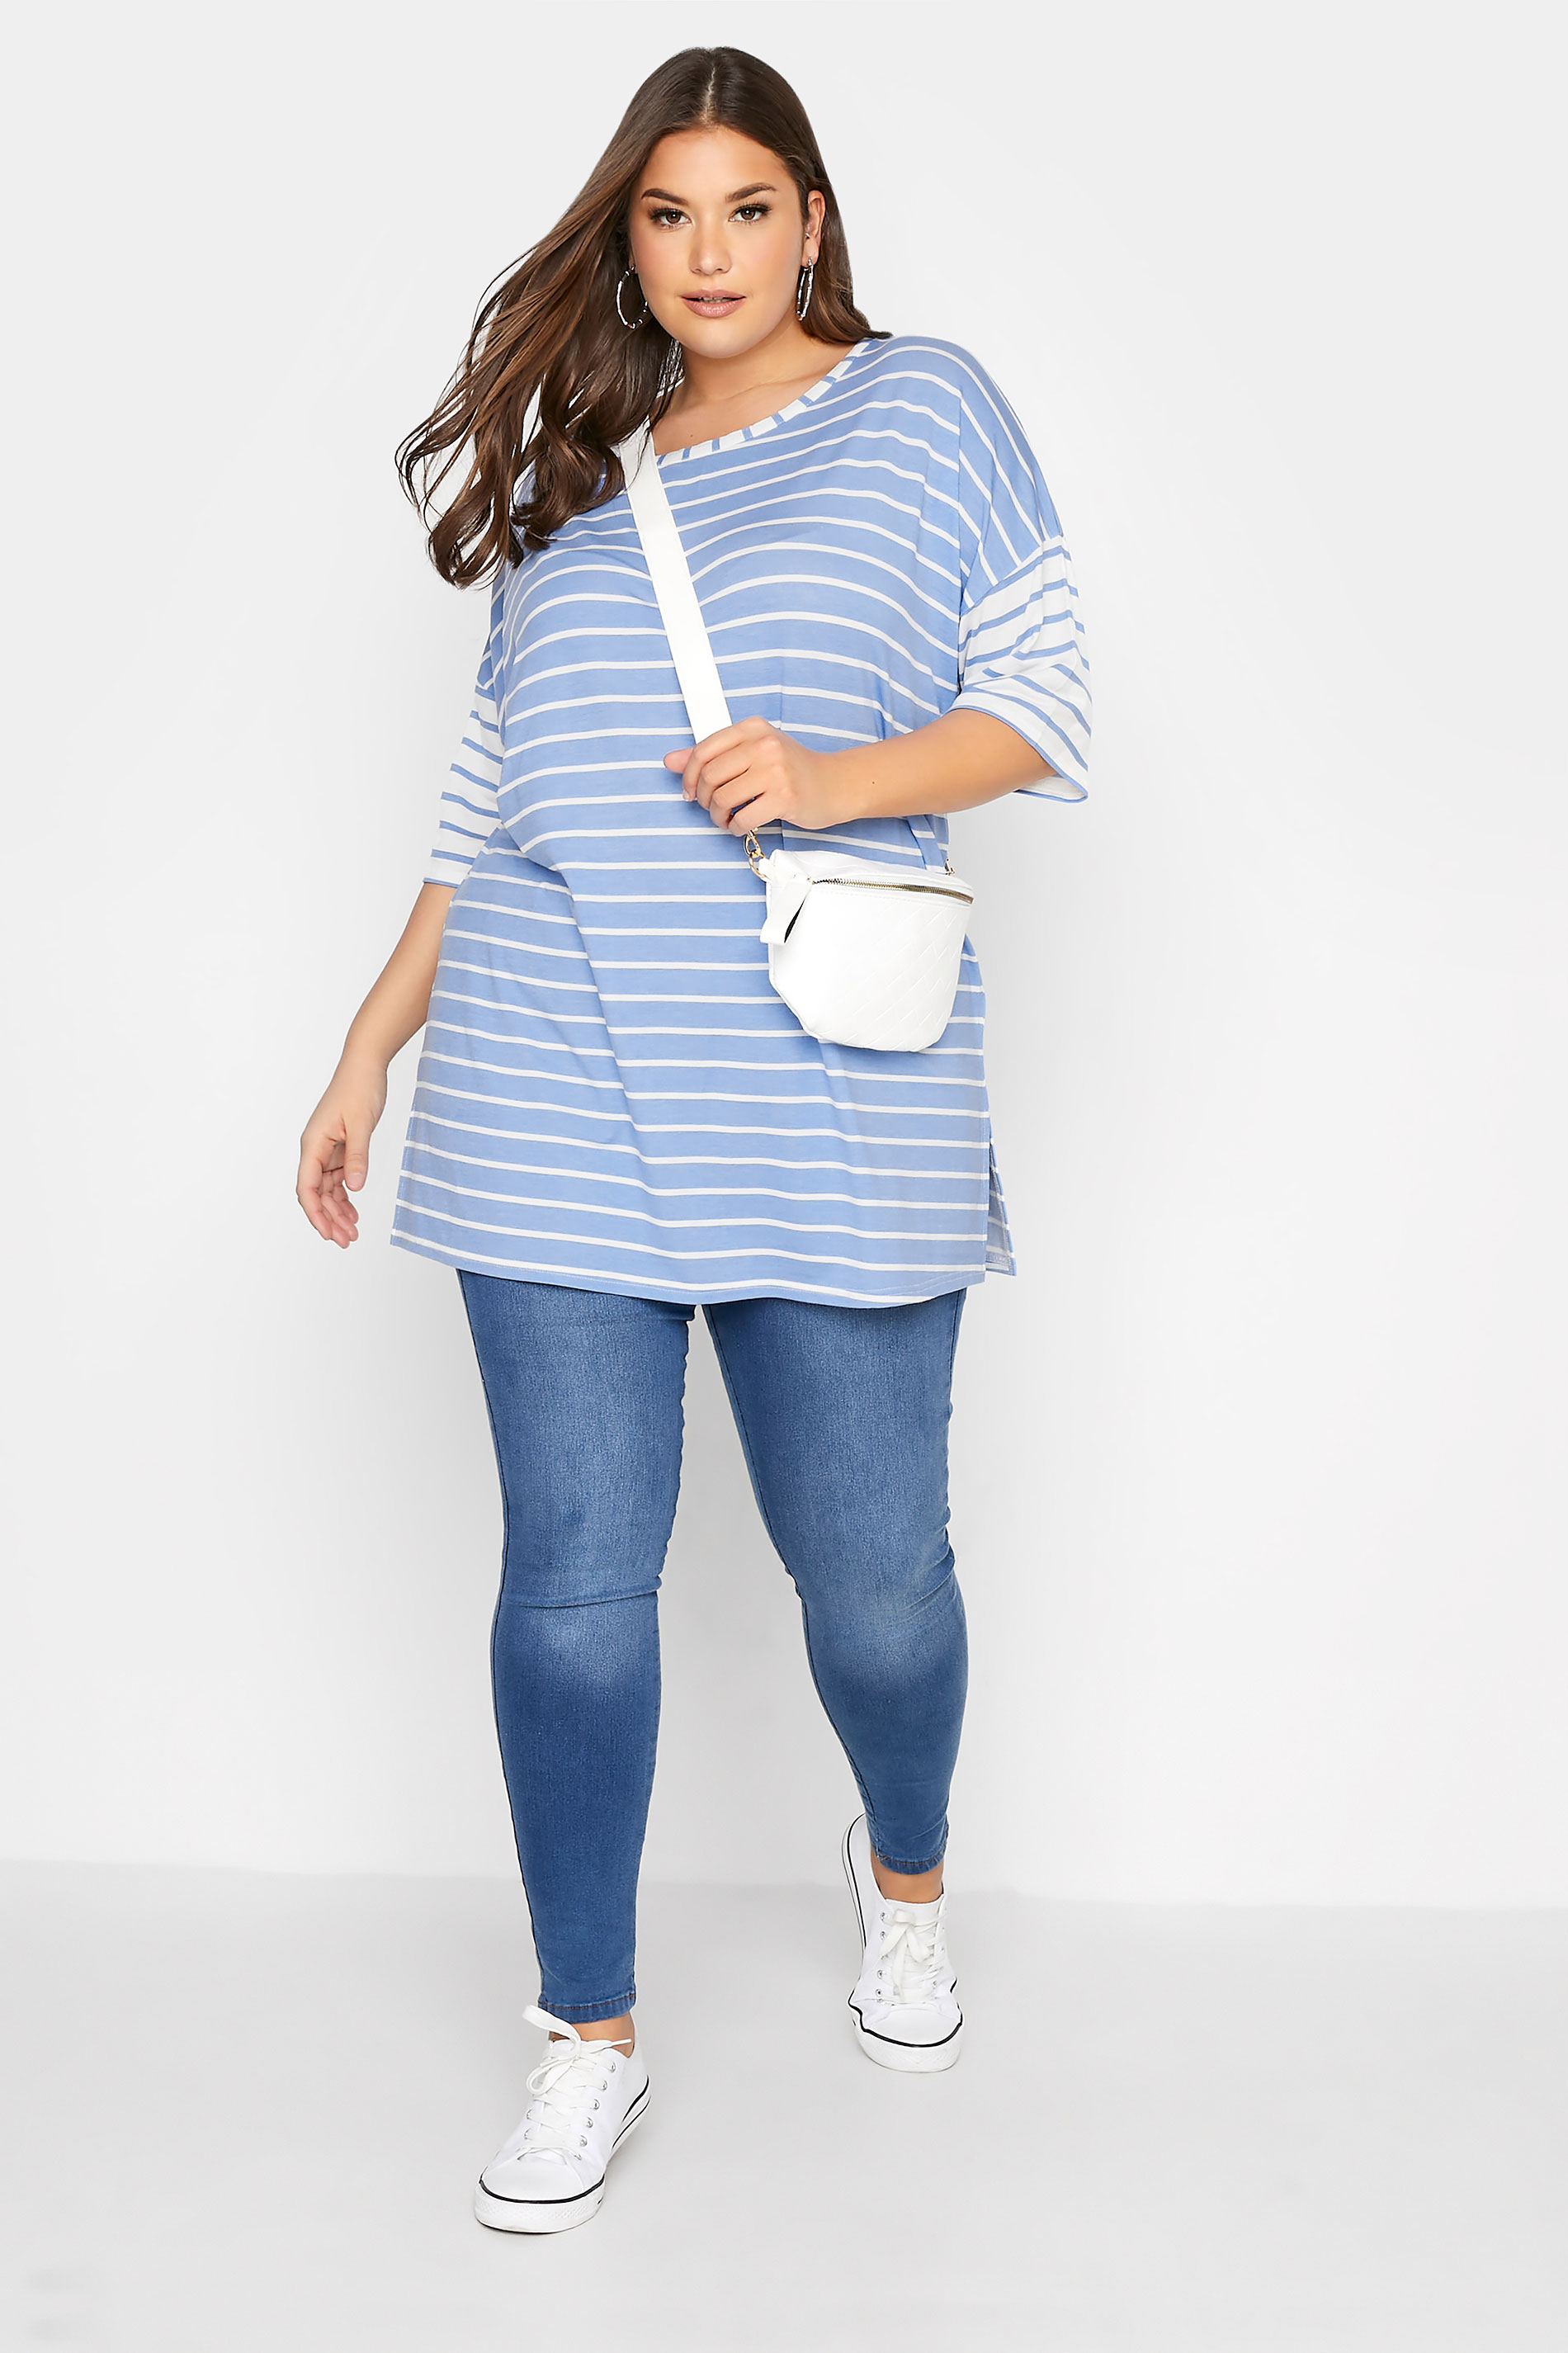 Grande taille  Tops Grande taille  Tops Casual | LIMITED COLLECTION - T-Shirt Oversize Bleu Ciel à Rayures - TX58197